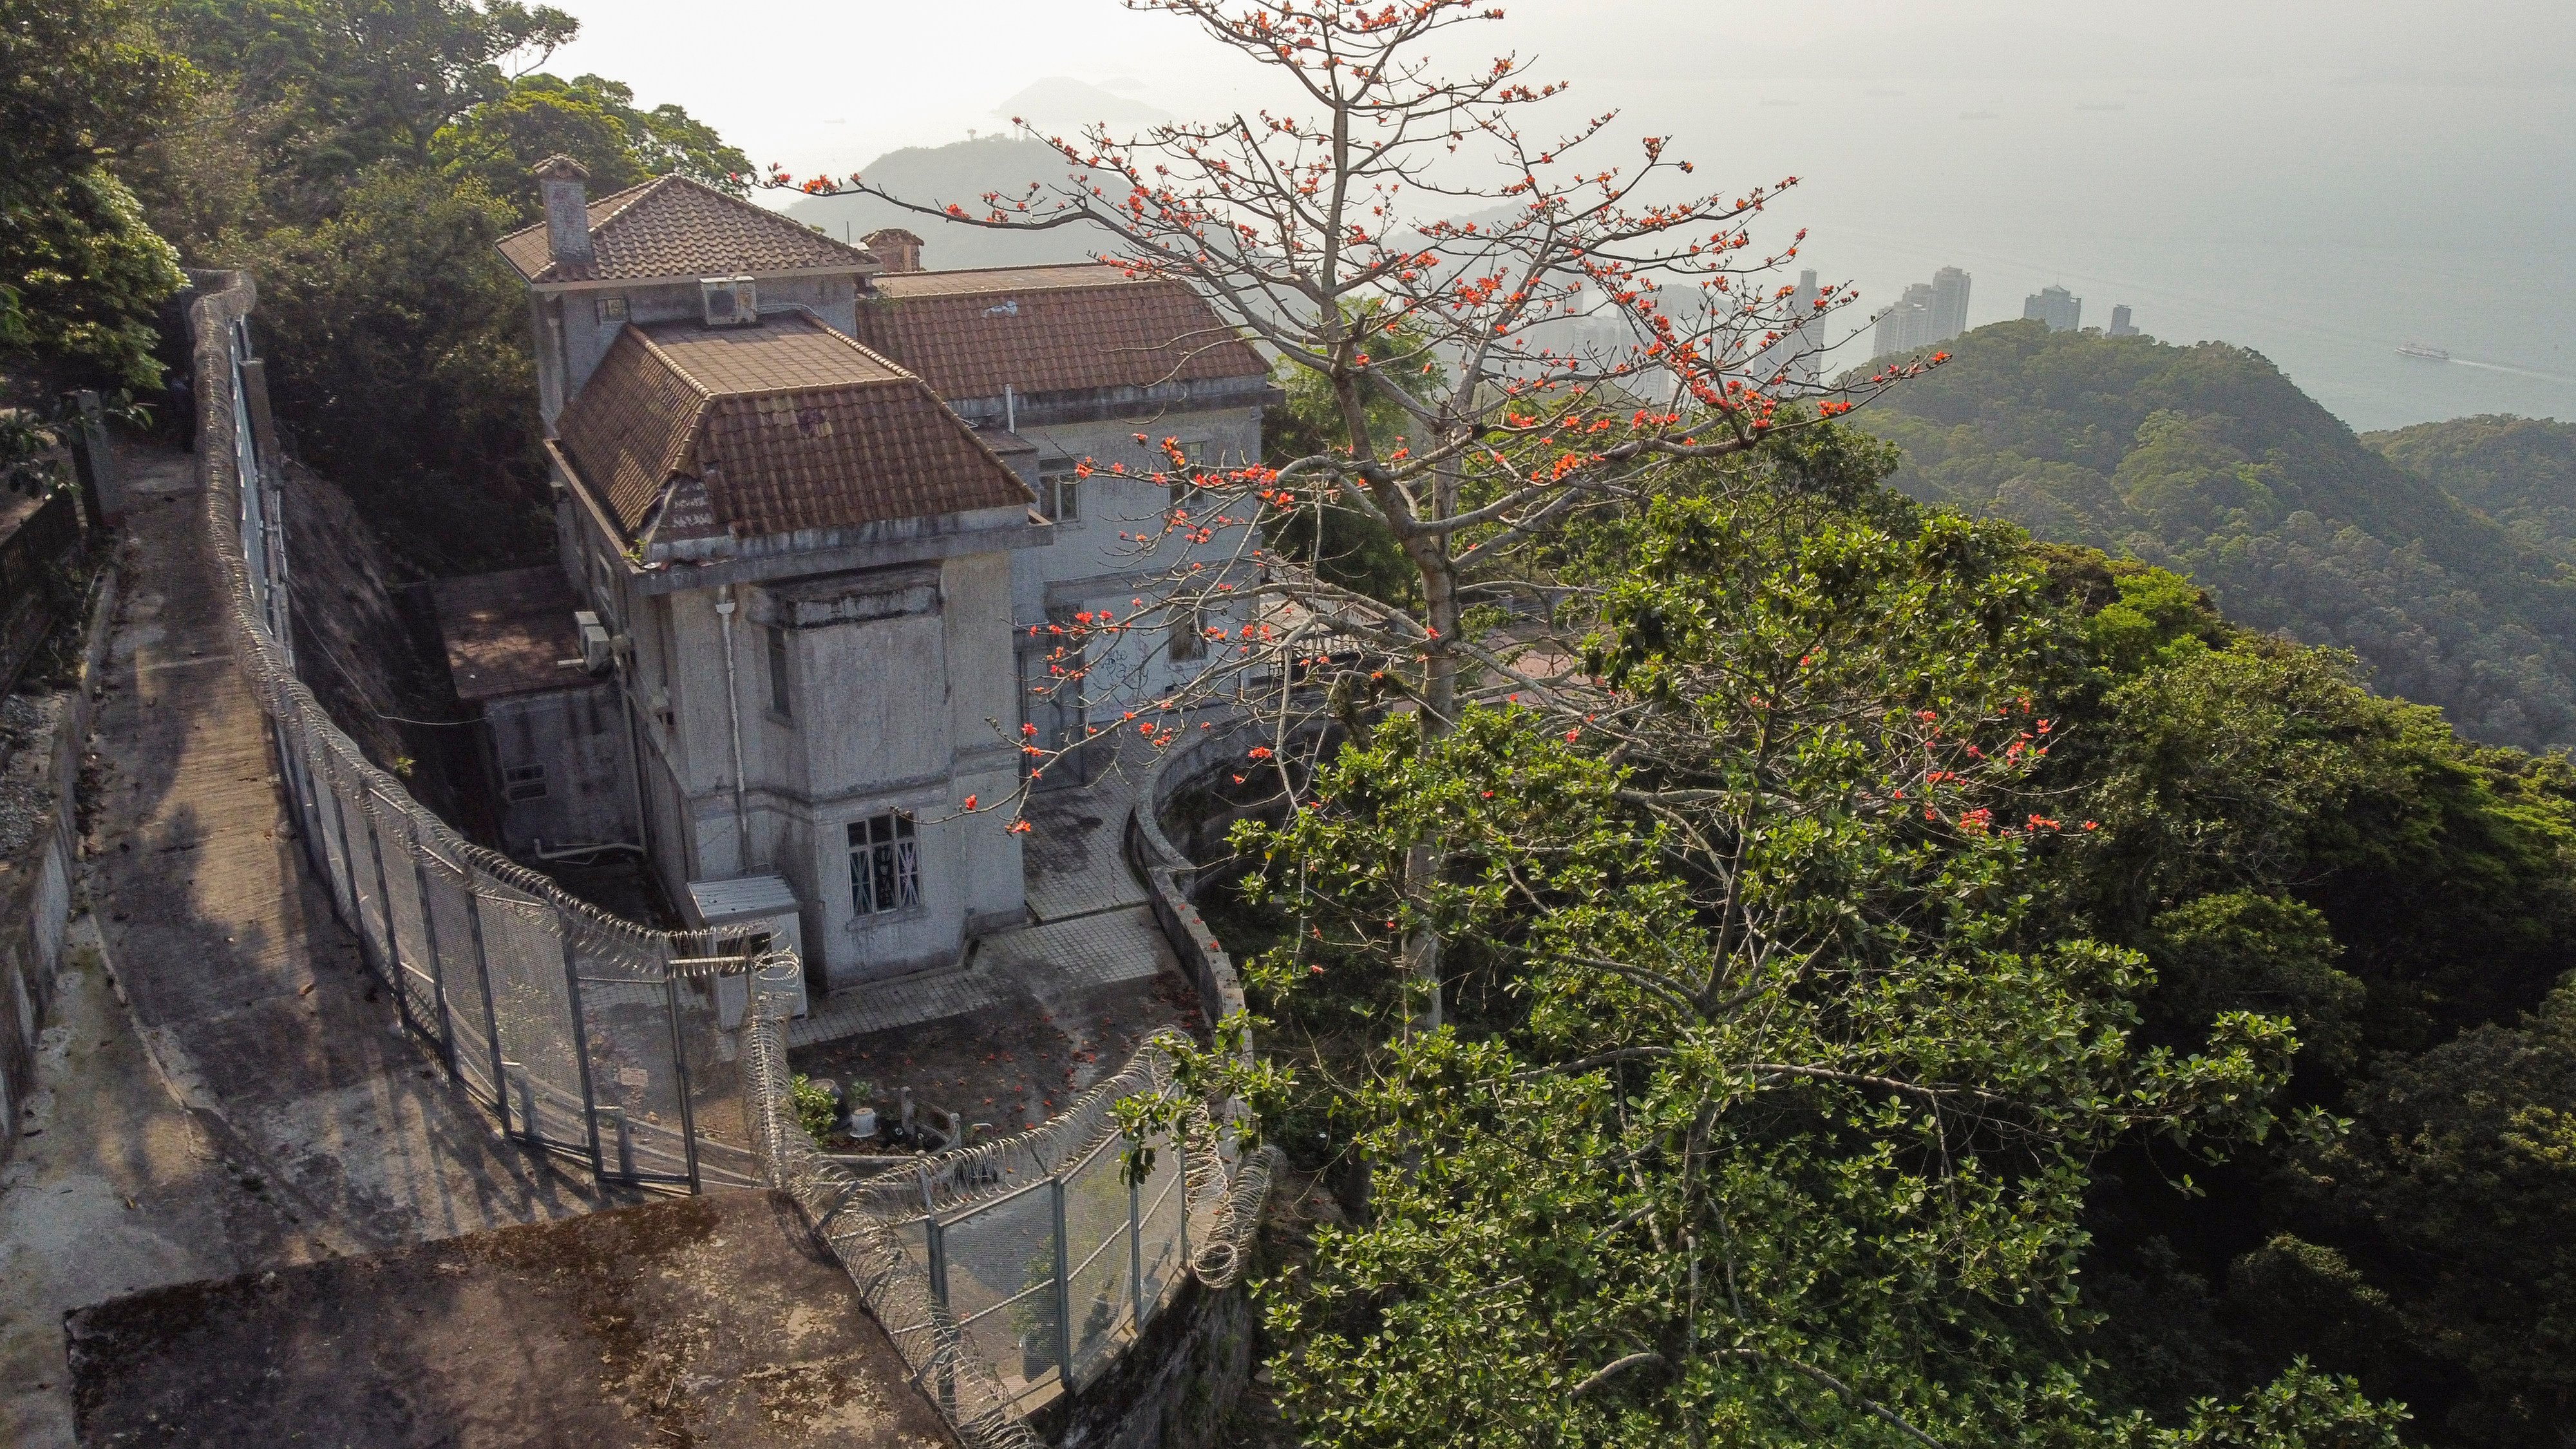 The Peak’s Dragon Lodge is rumoured to be one of the most haunted spots in Hong Kong. Photo: Martin Chan